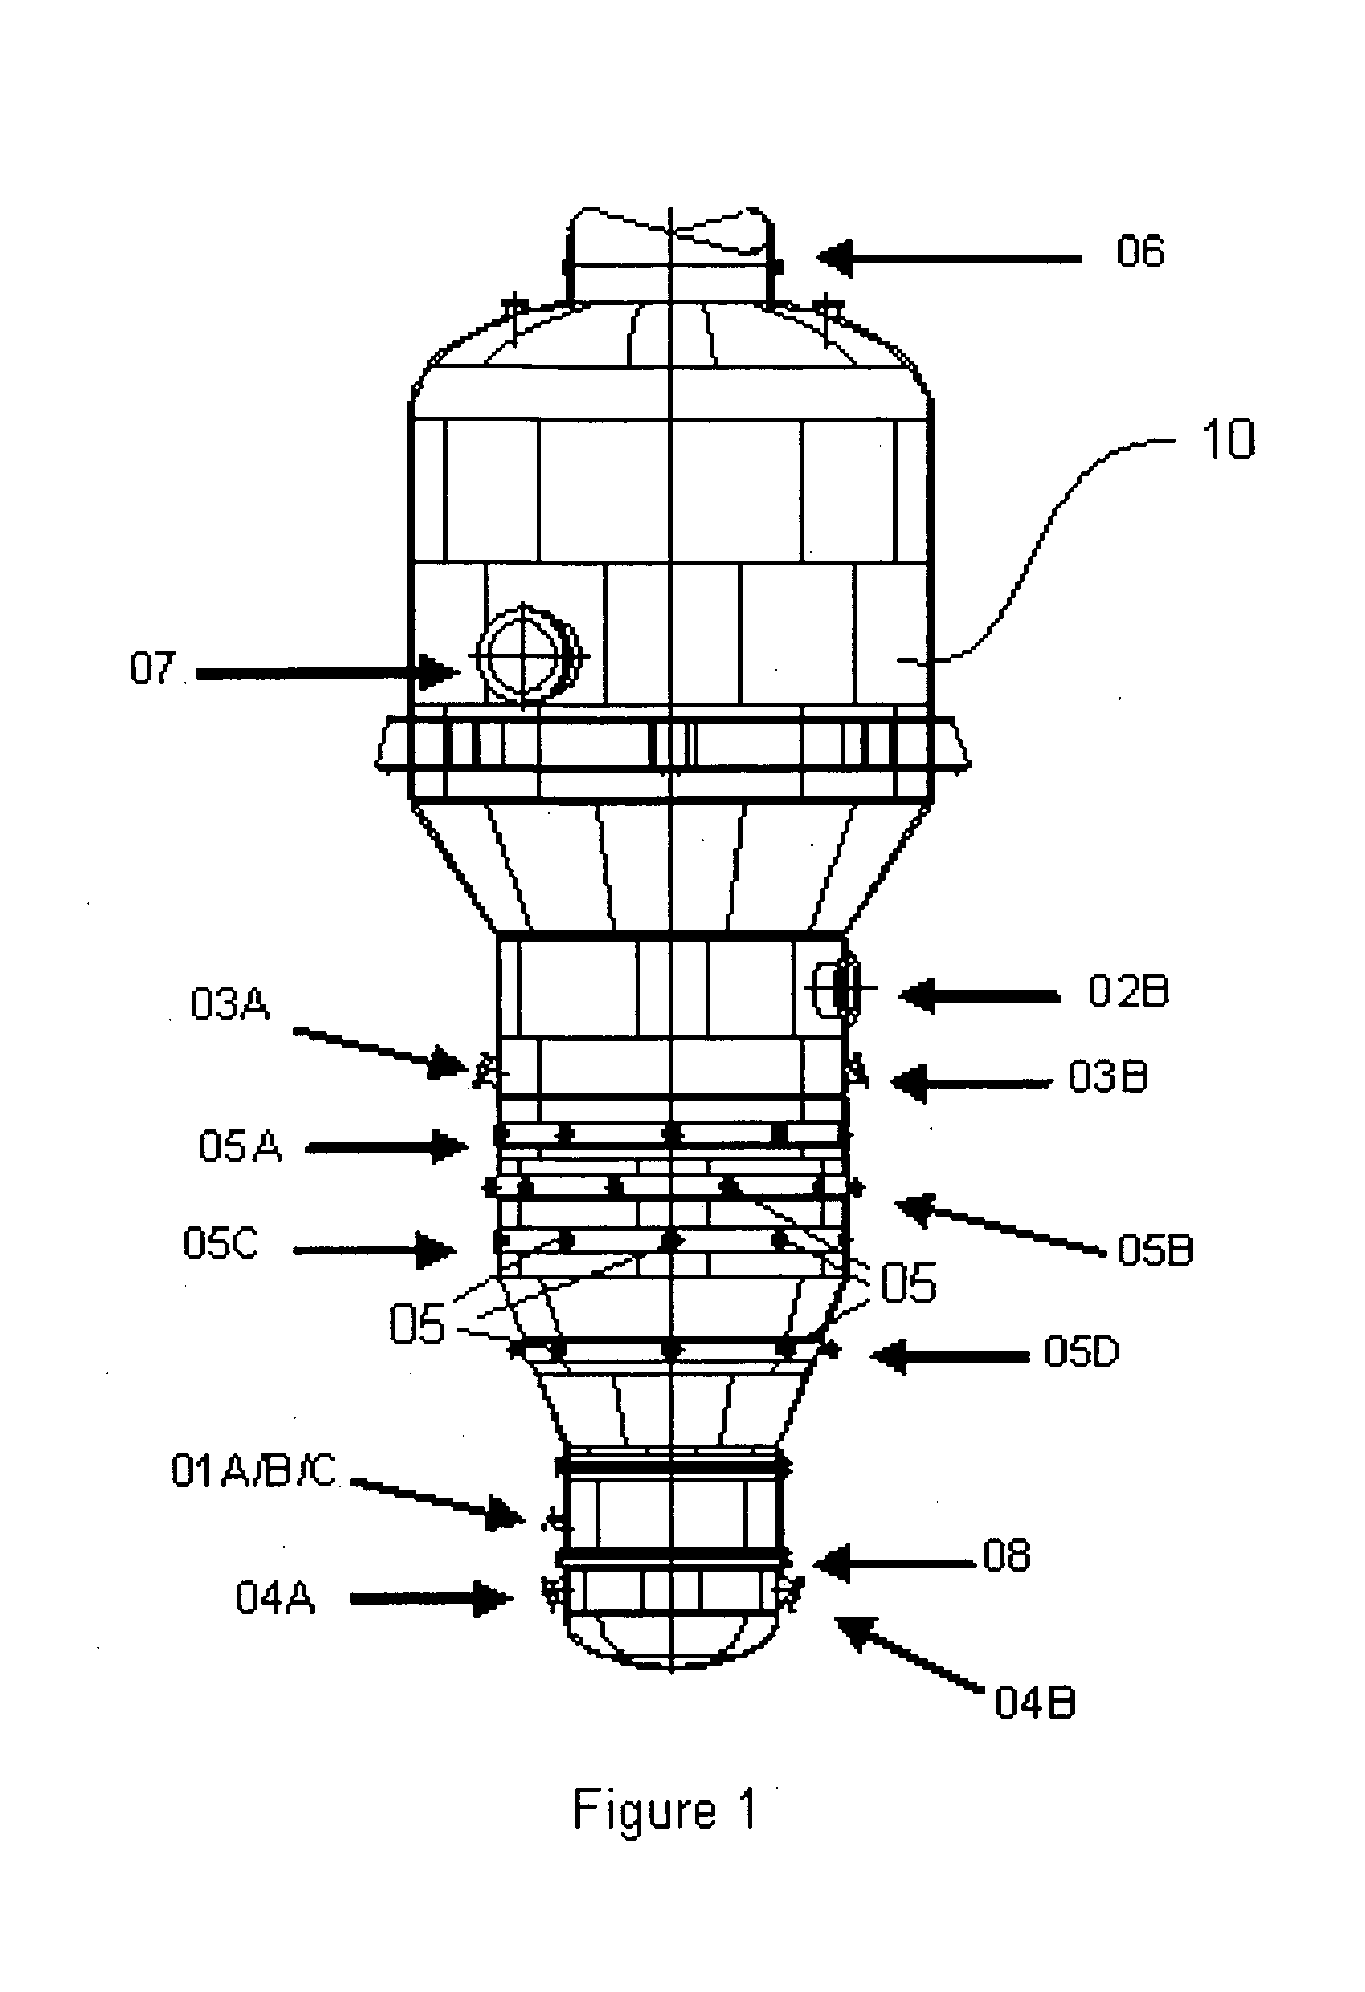 Thermal gasification reactor for producing heat energy from waste